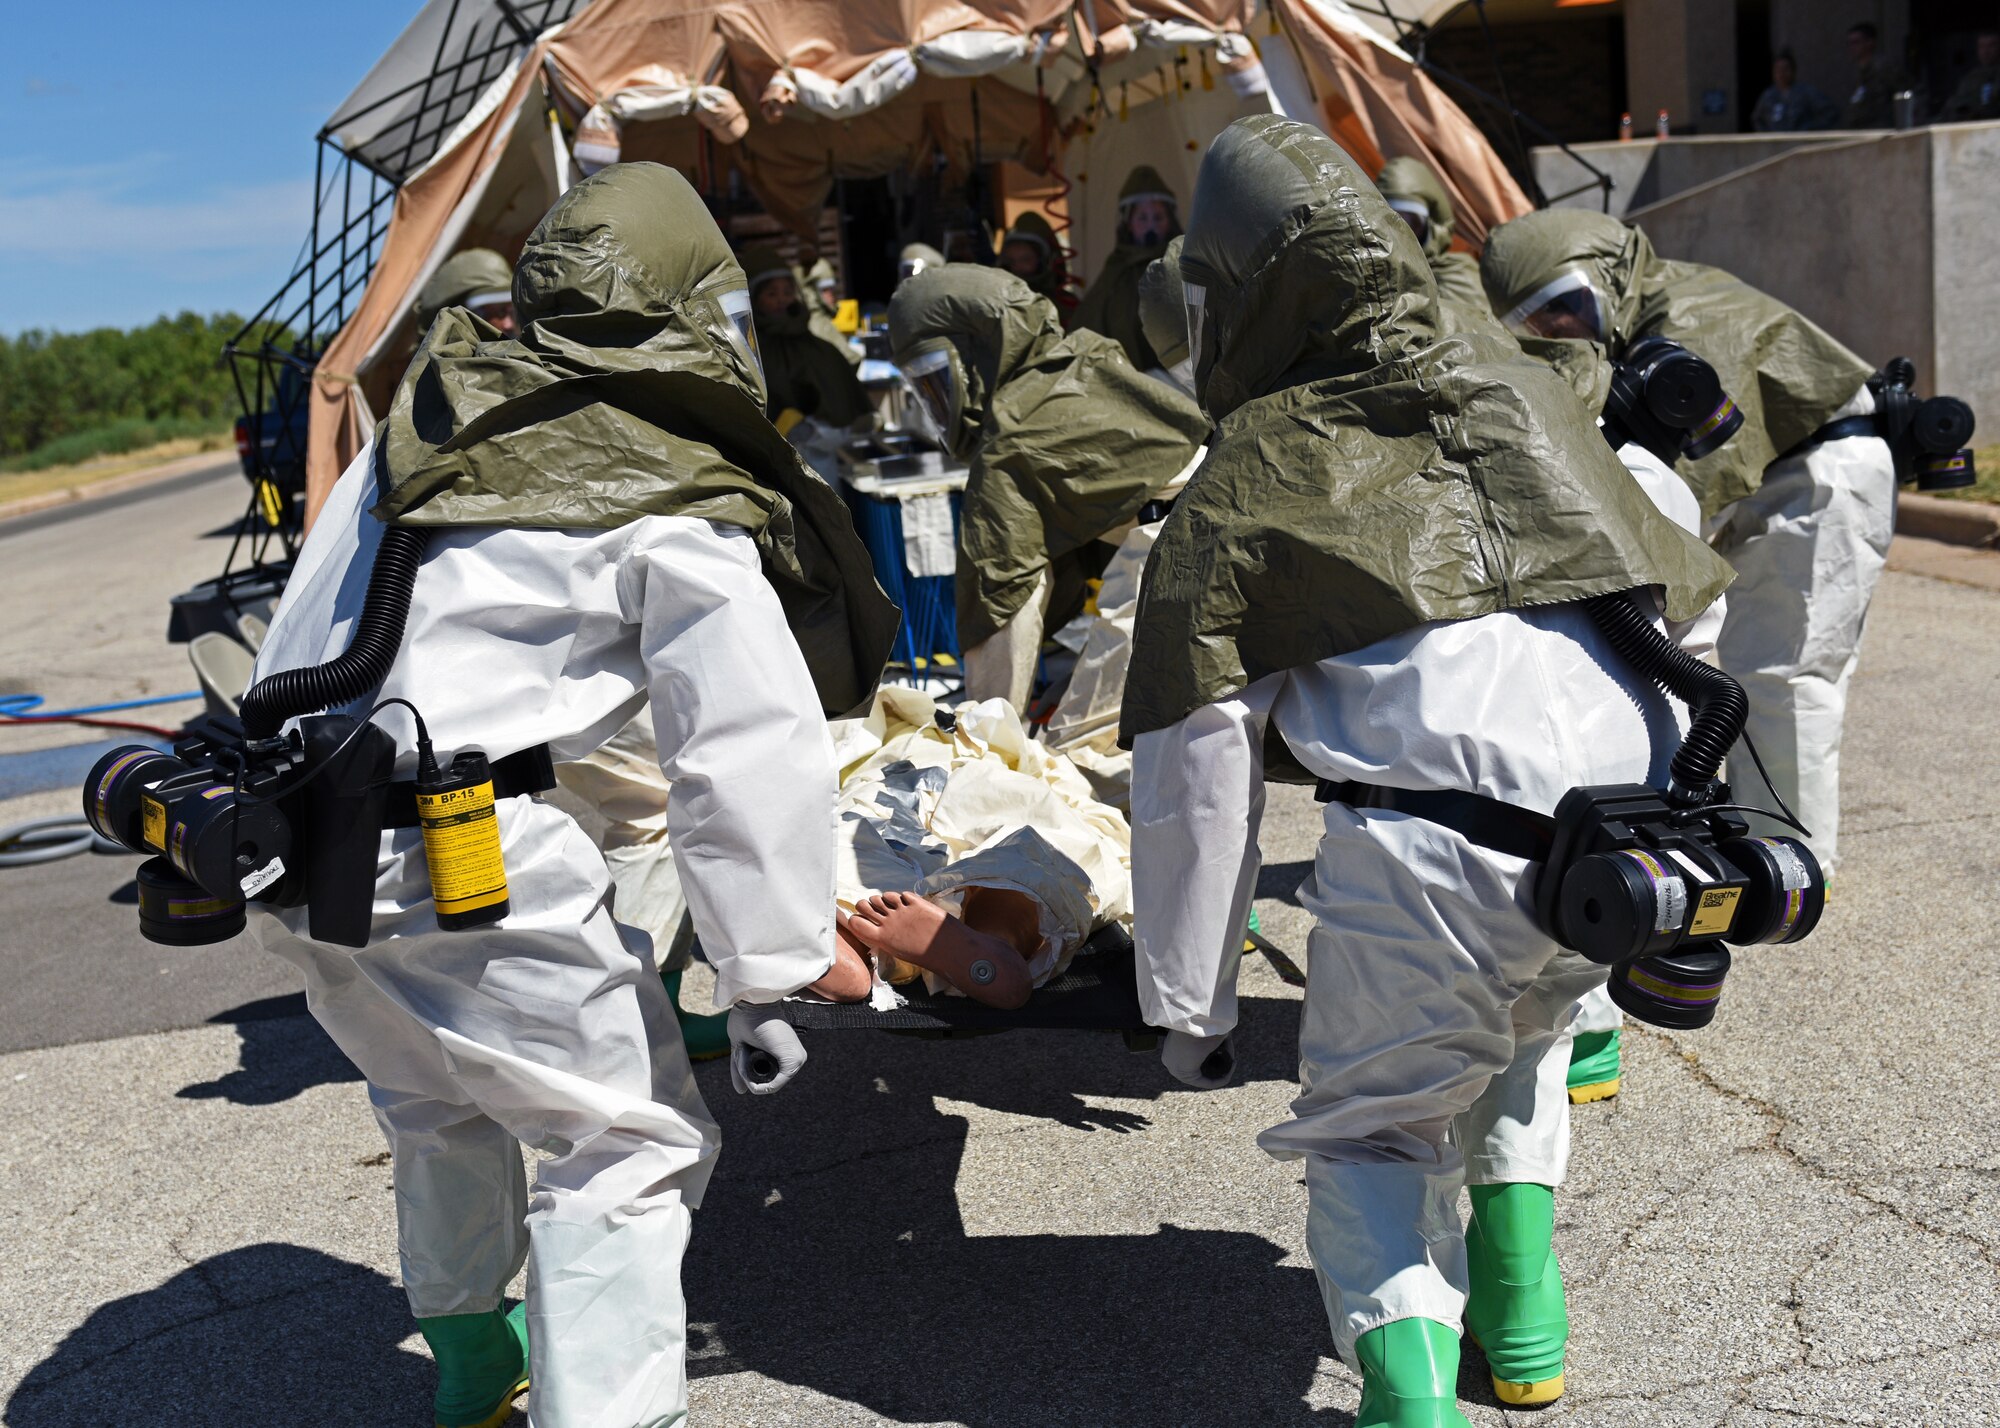 Personnel from the 17th Medical Group carry a simulated patient into the decontamination center during their medical in-place decontamination training at the Ross Clinic on Goodfellow Air Force Base, Texas, September 12, 2019. This training includes many different aspects such as setting up the decontamination center along with decontaminating and treating patients. (U.S. Air Force photo by Airman 1st Class Robyn Hunsinger/Released)